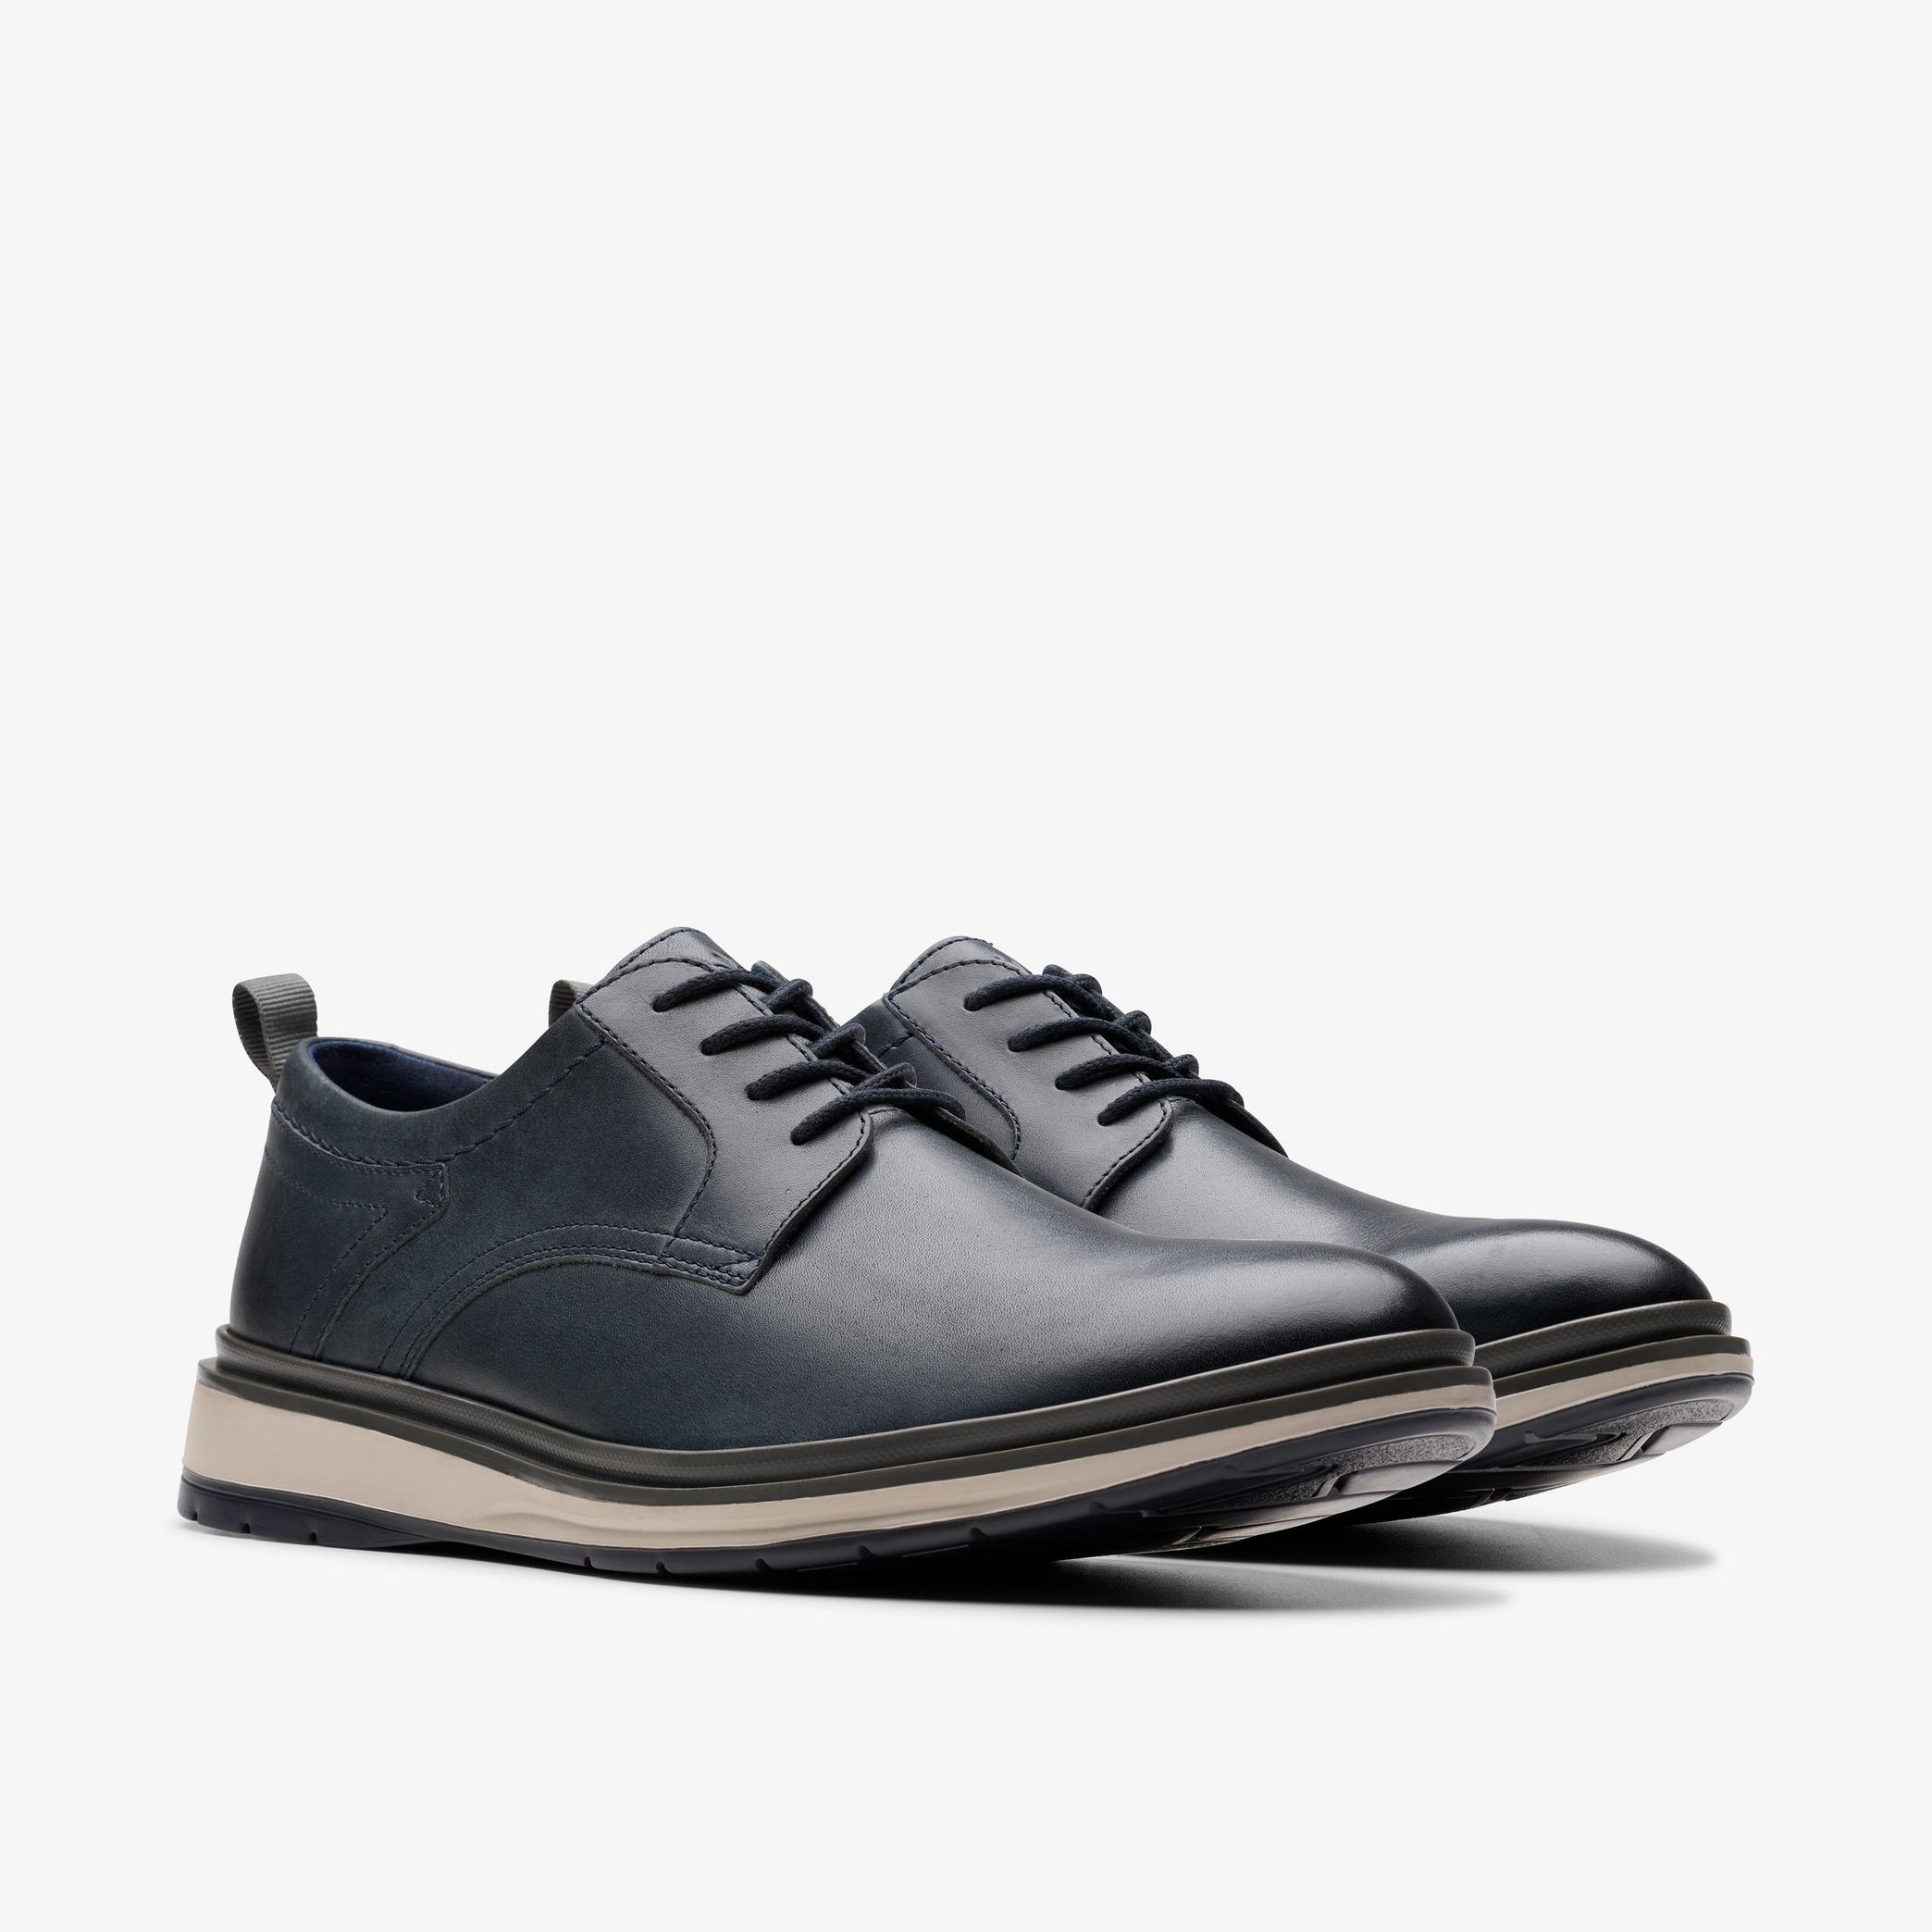 Chantry Lo Navy Leather Oxford Shoes, view 4 of 6